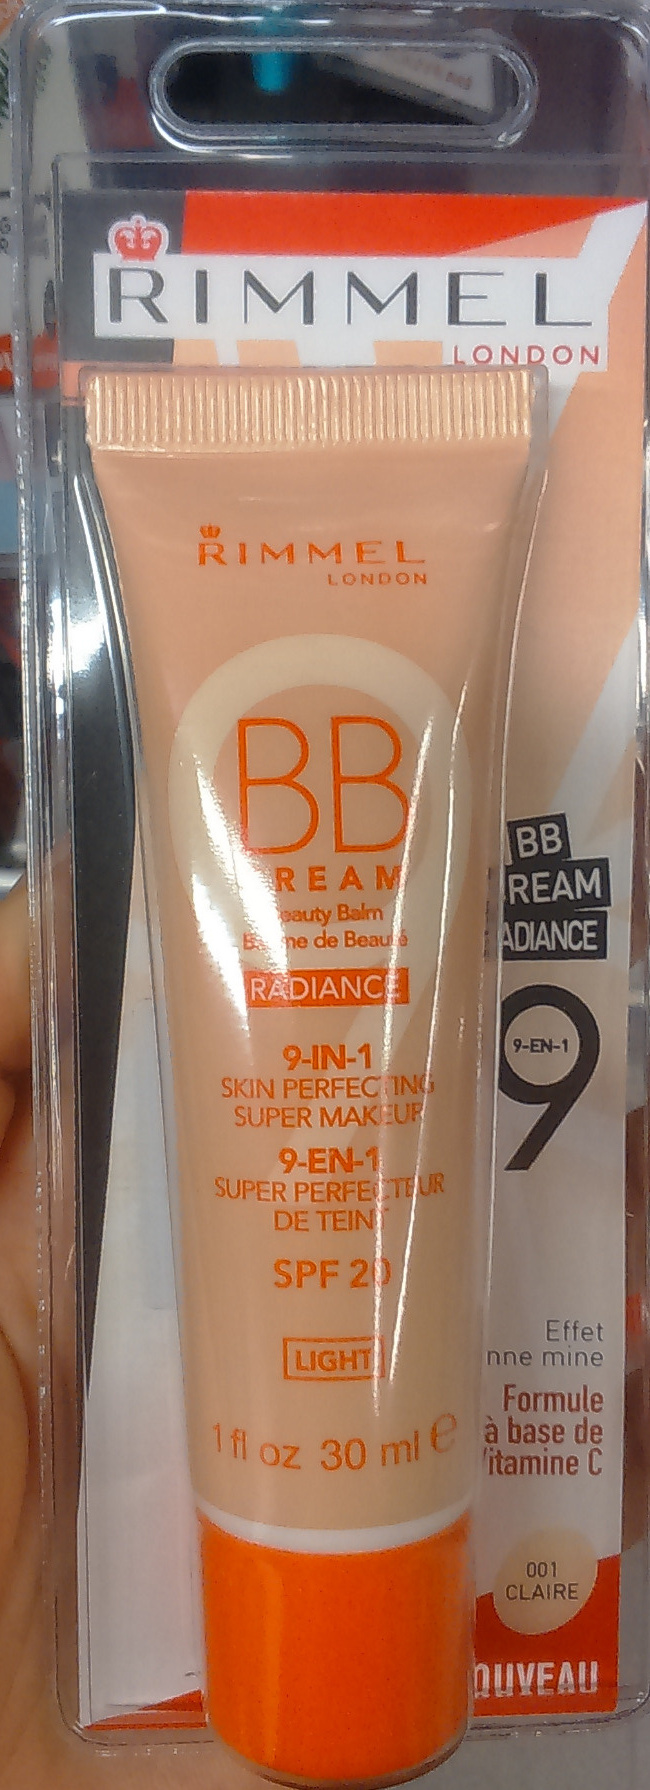 BB cream radiance 9 en 1 SPF 20 - 001 claire - Product - fr